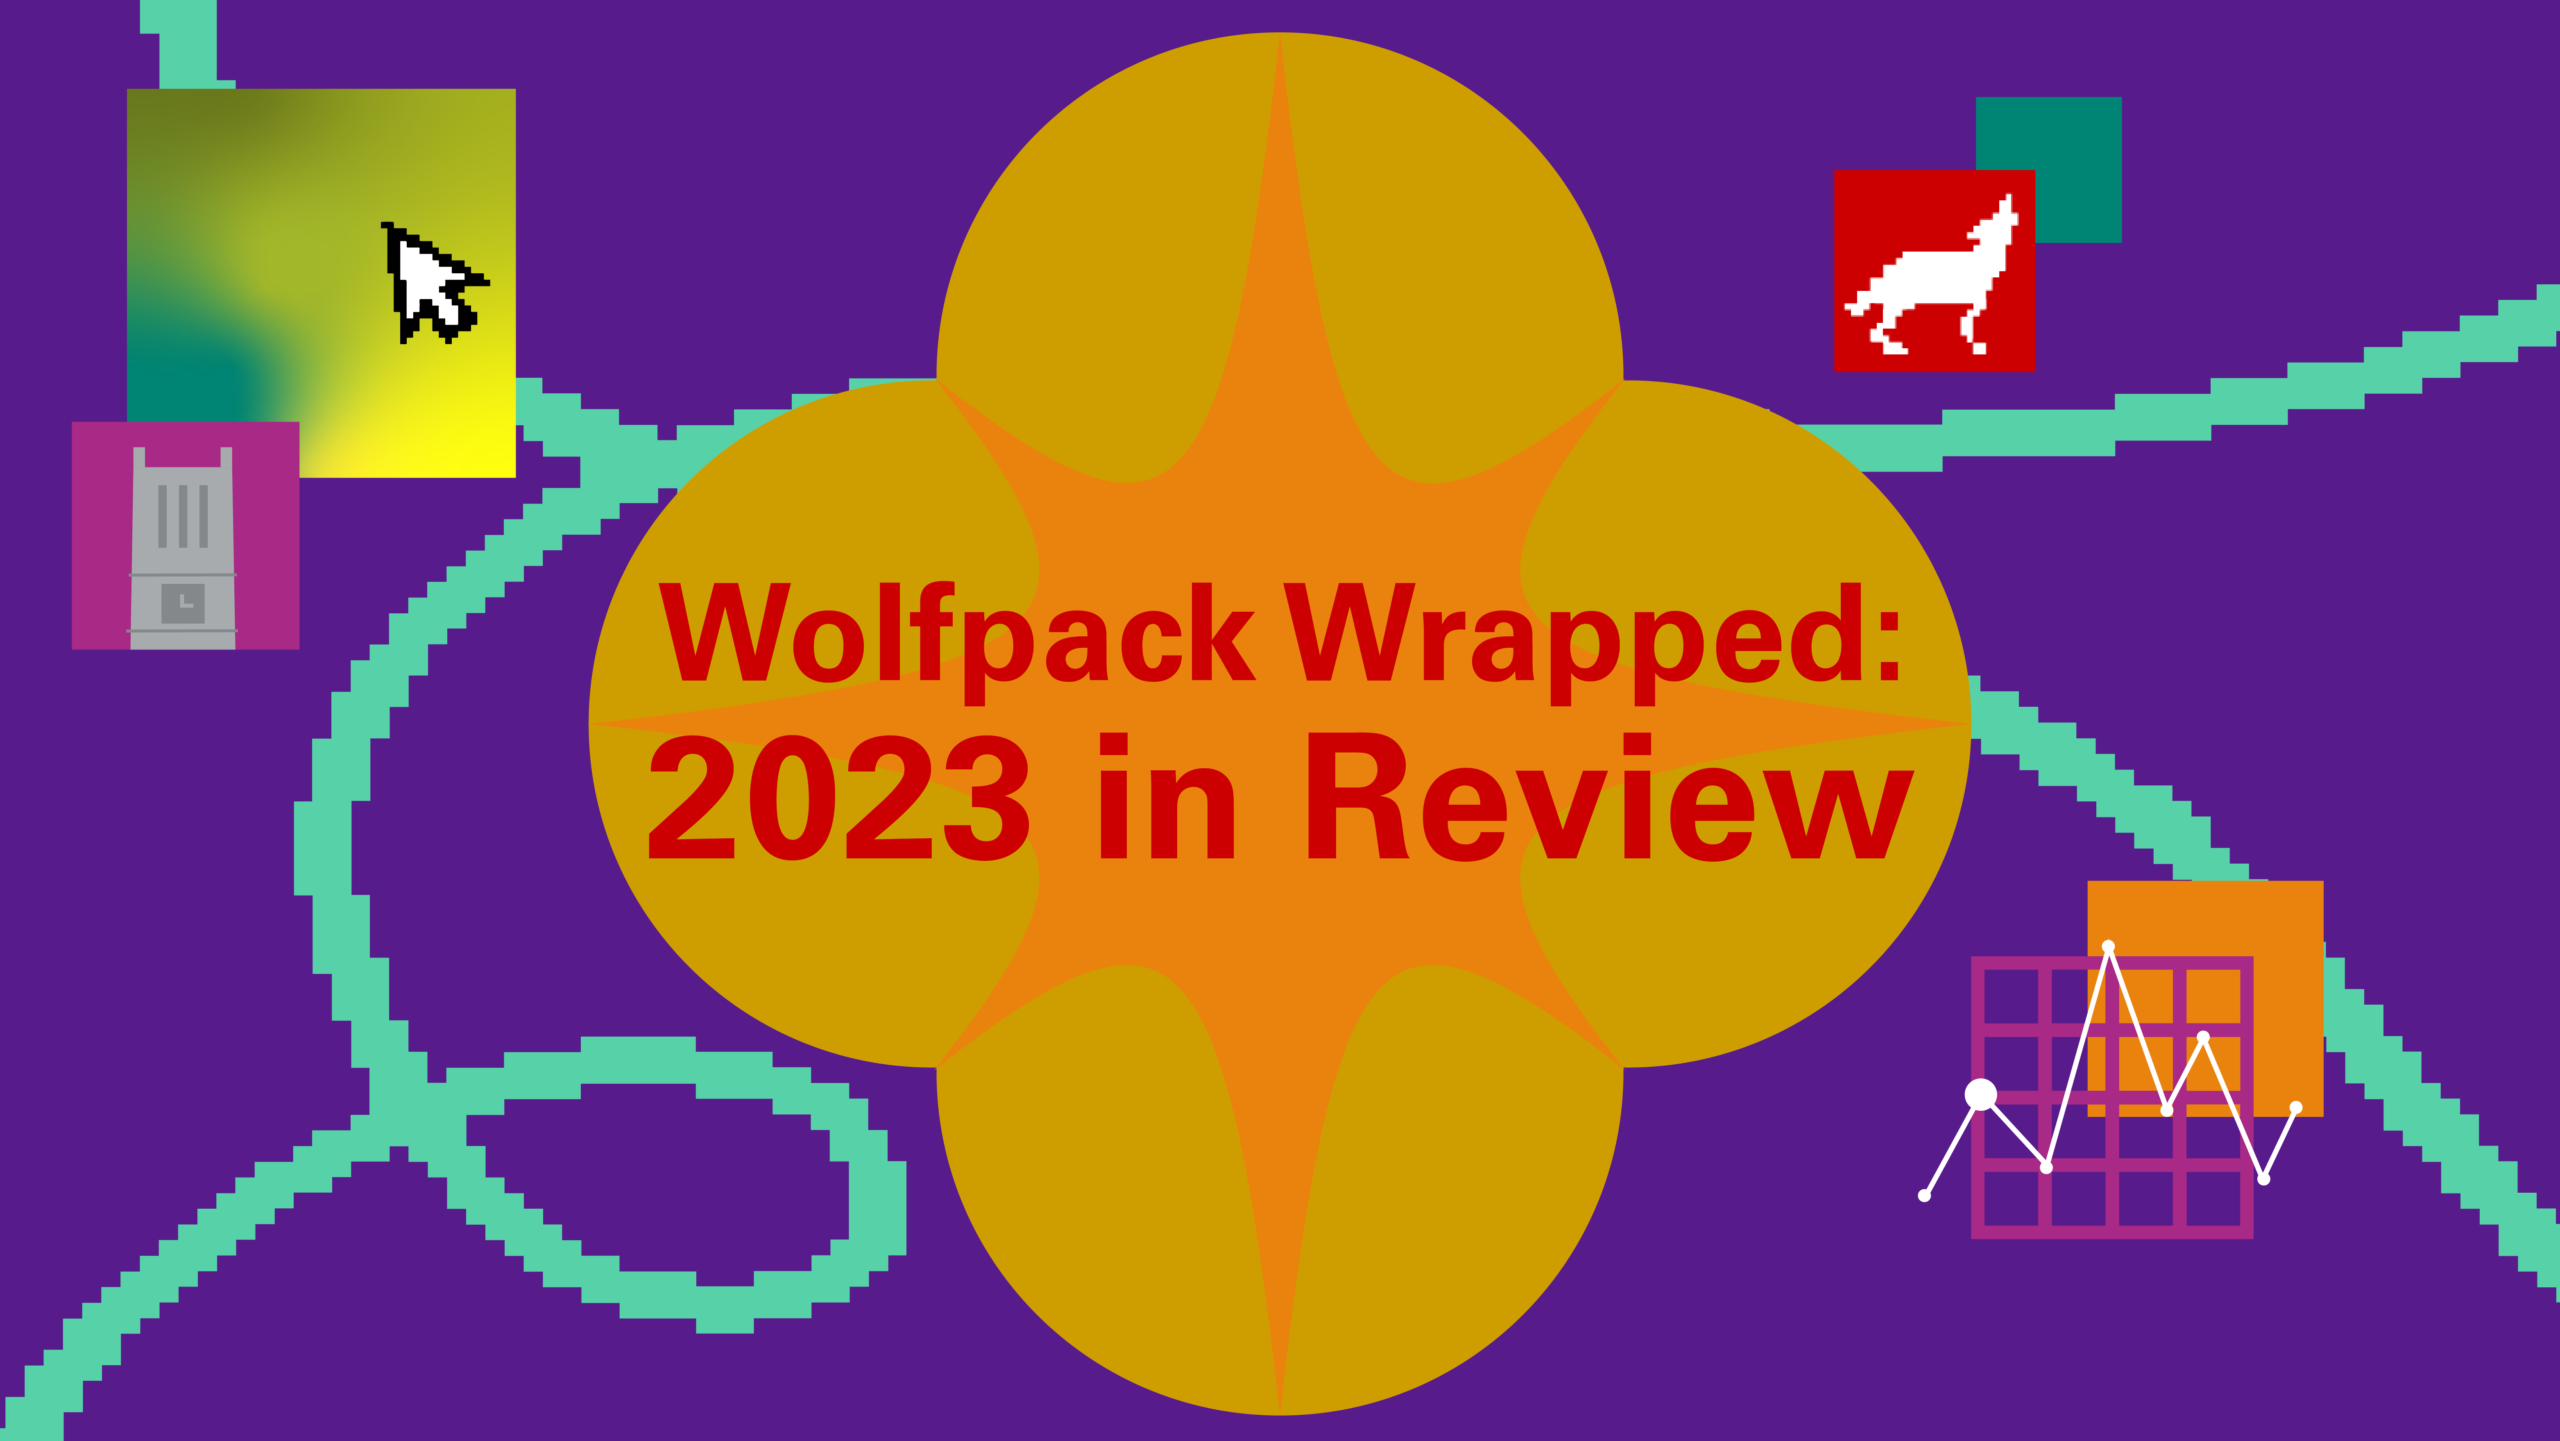 A graphic reads "Wolfpack Wrapped: 2023 in Review"